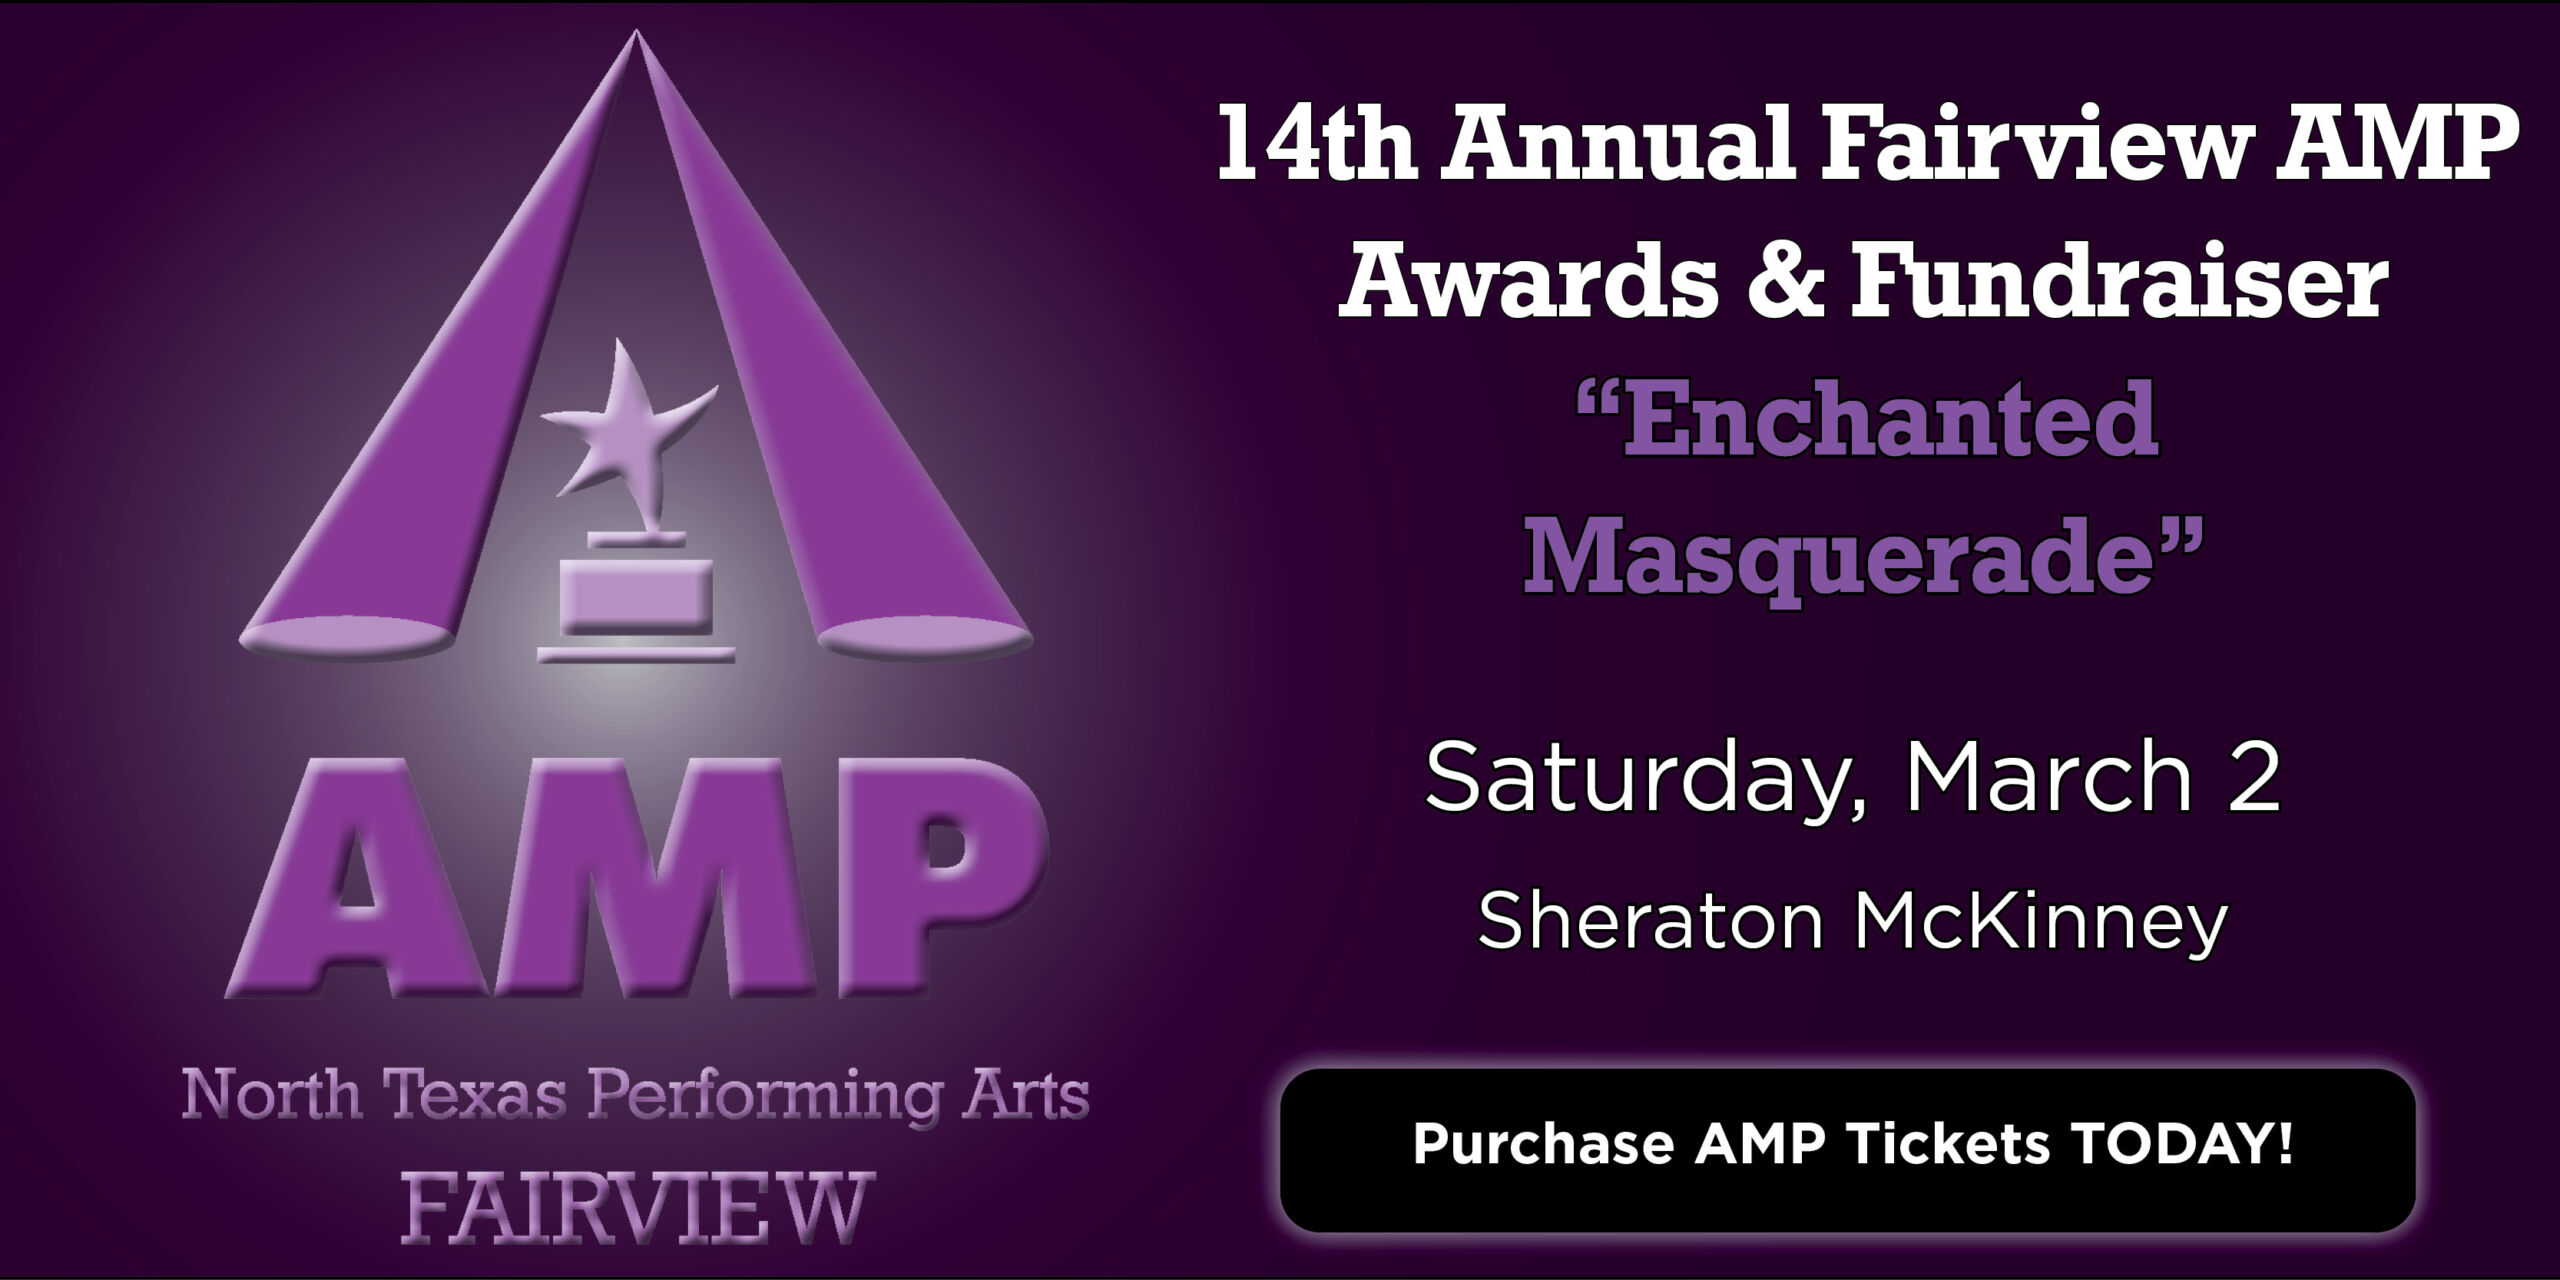 Fairview AMP Awards graphic